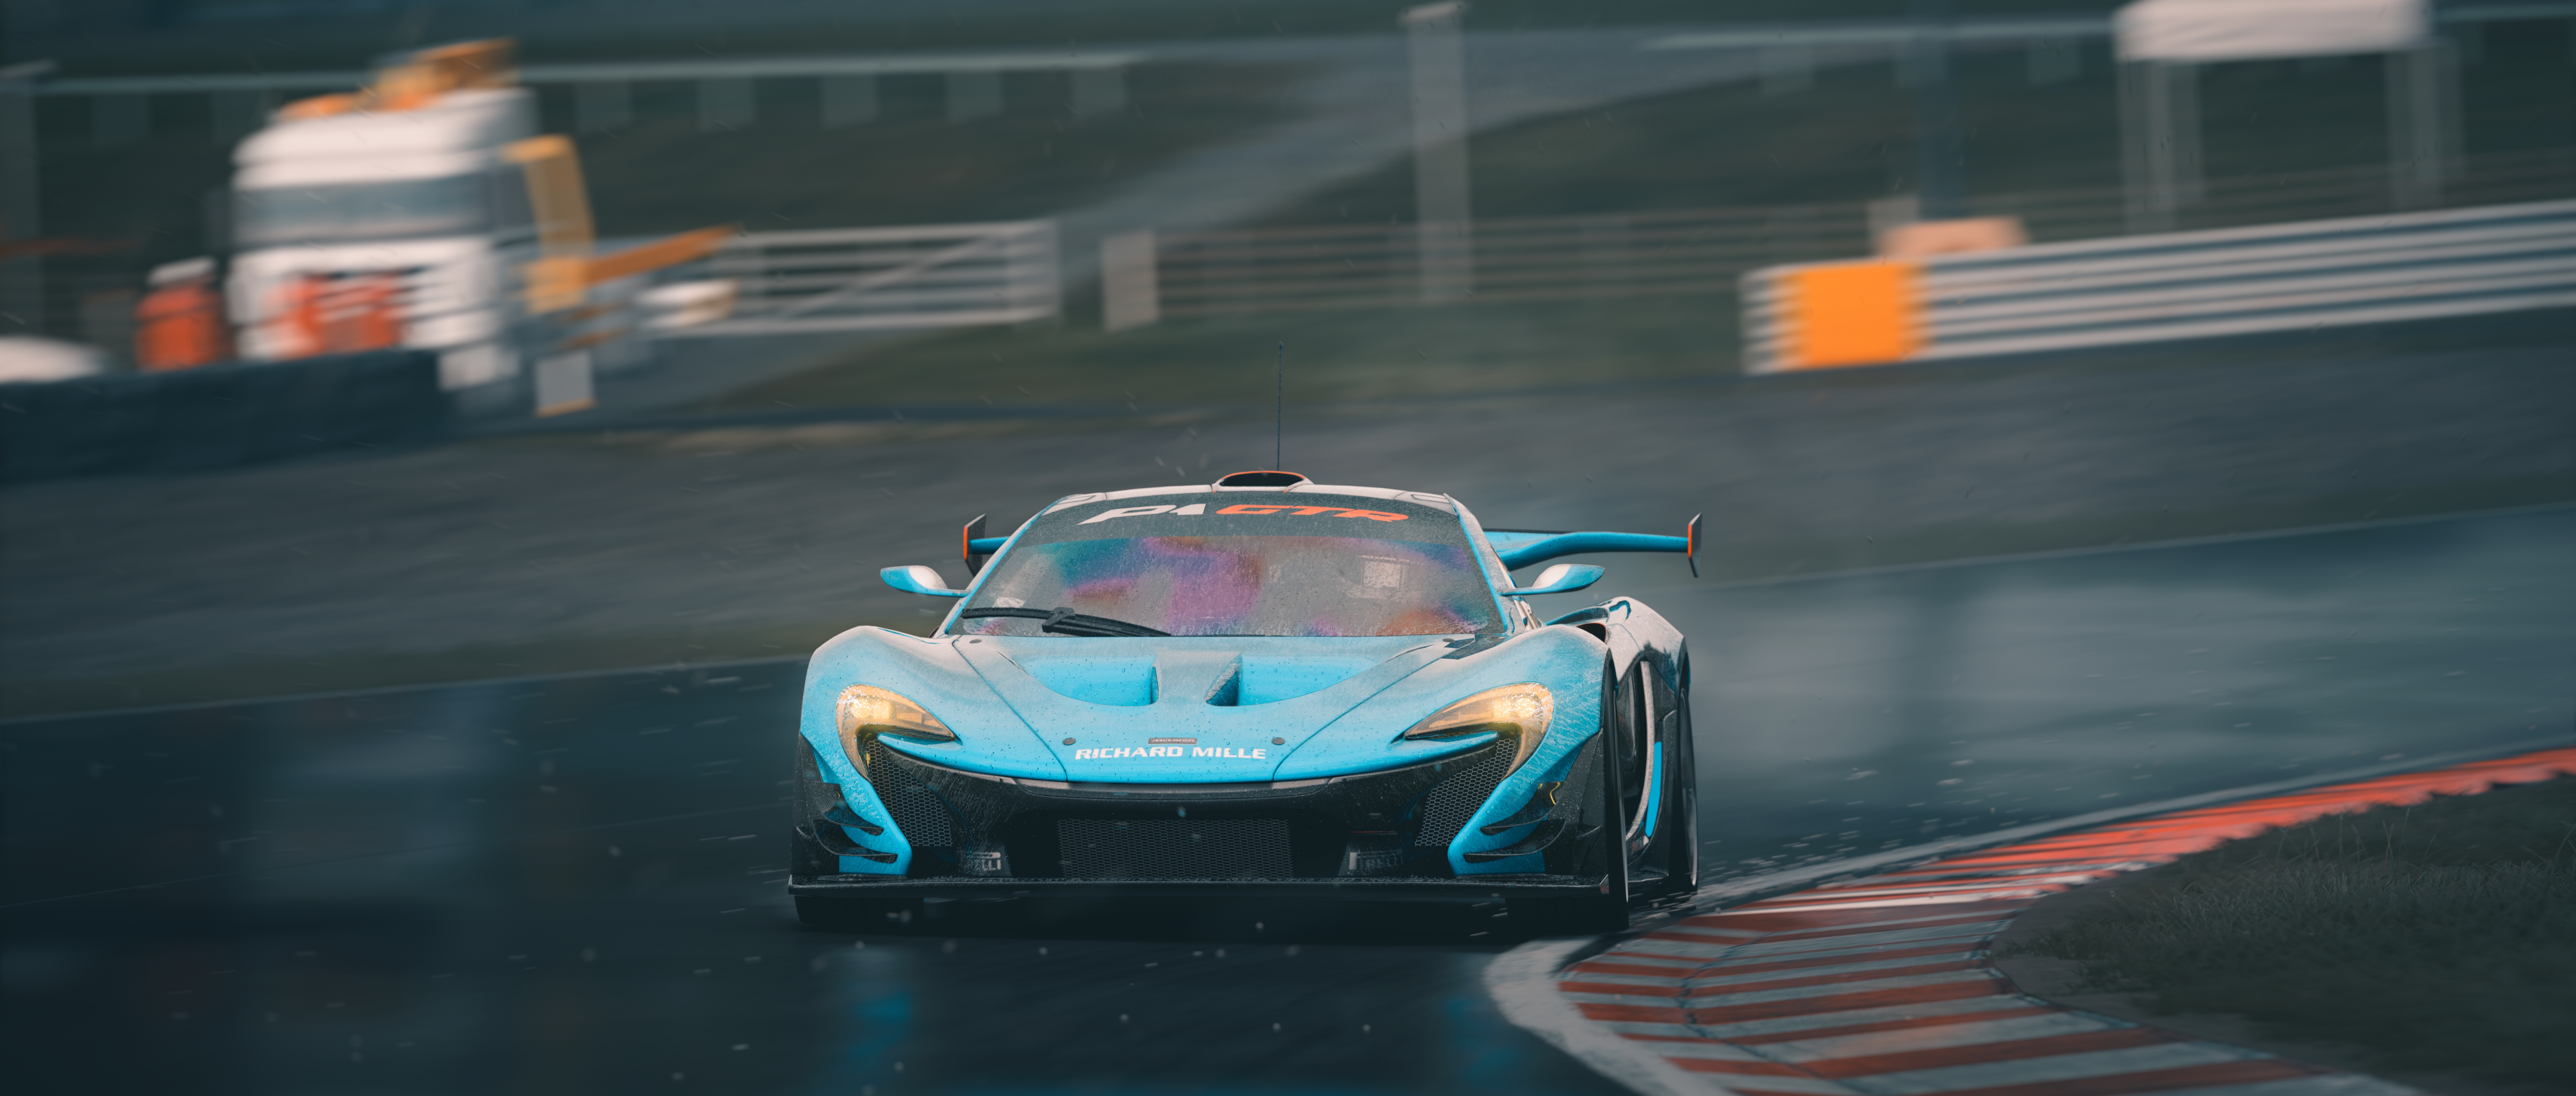 General 7680x3269 McLaren P1 car PC gaming Assetto Corsa frontal view headlights video game art vehicle motion blur blurred video games